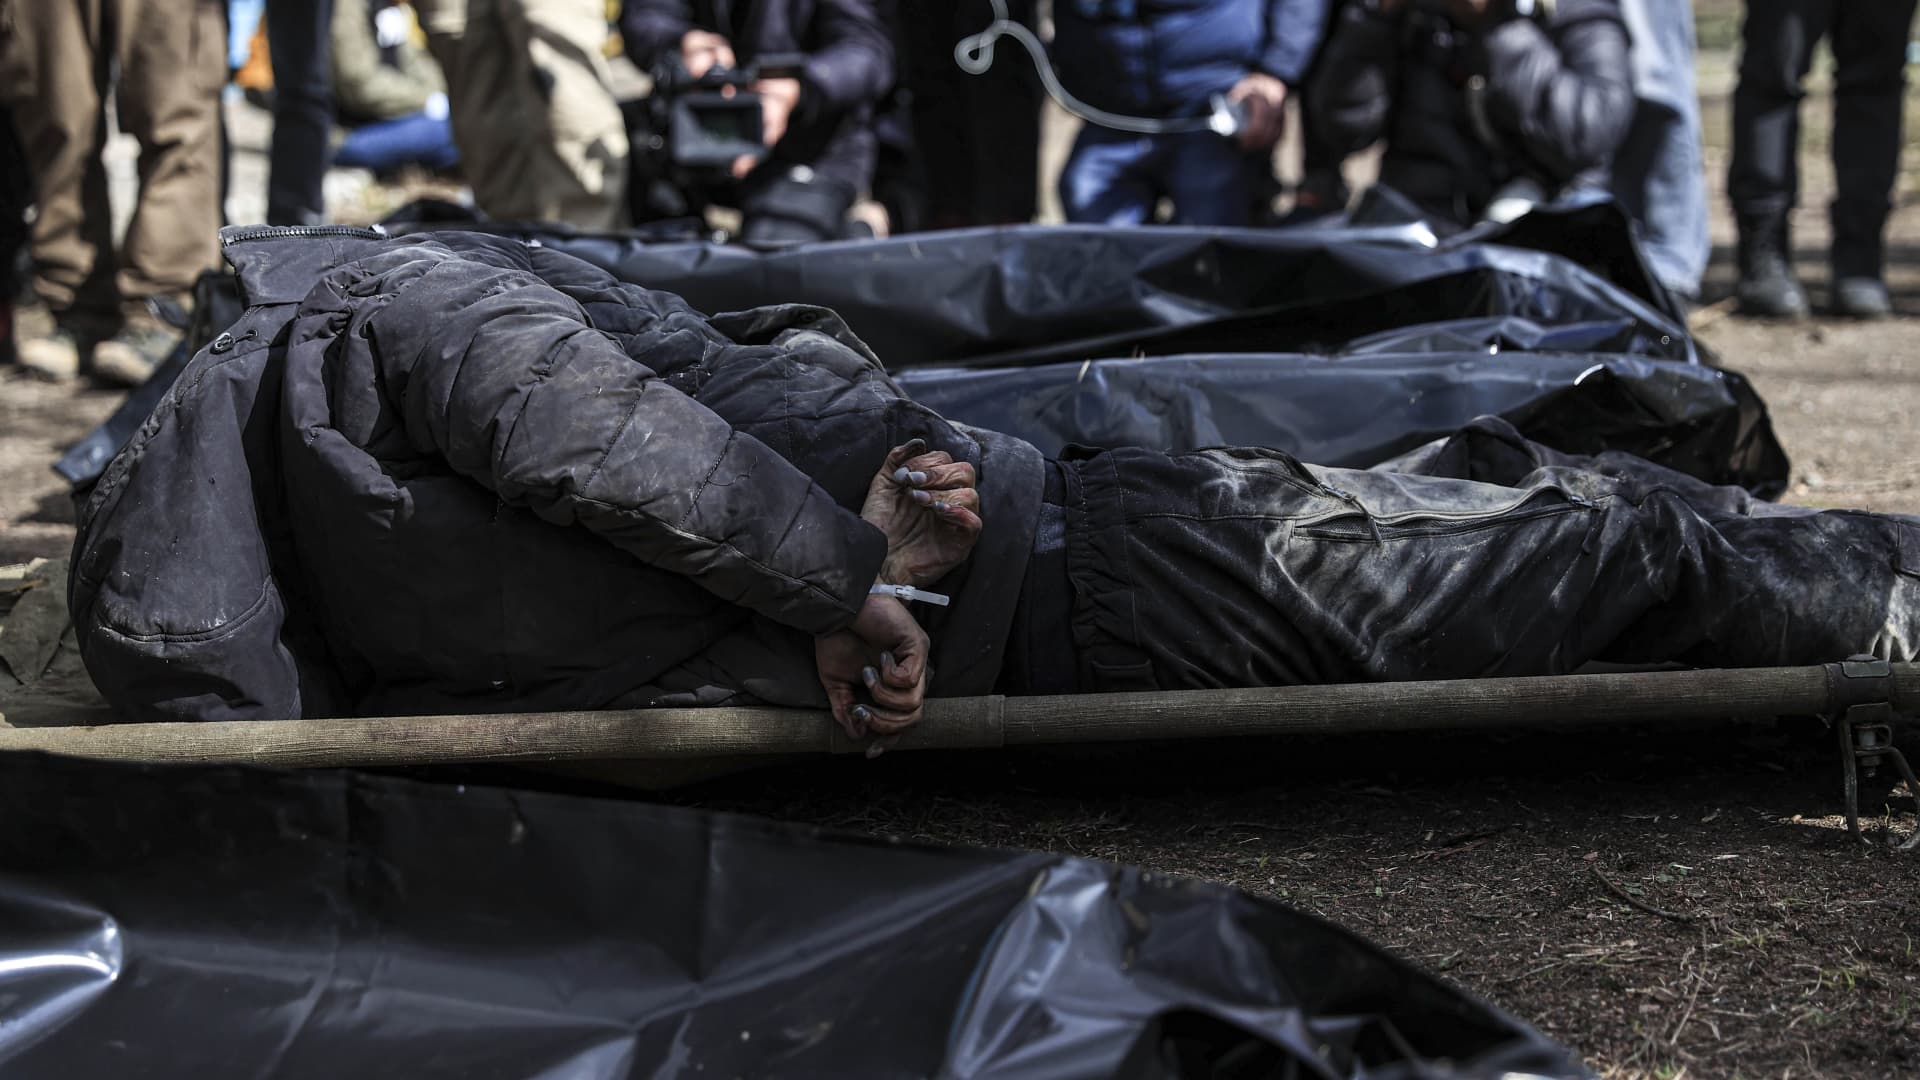 (EDITOR'S NOTE: Image depicts death) Civilians' bodies, which were found dead in the Ukrainian town of Bucha, were gathered to be buried on Monday, on April 4, 2022 in Bucha, Ukraine.